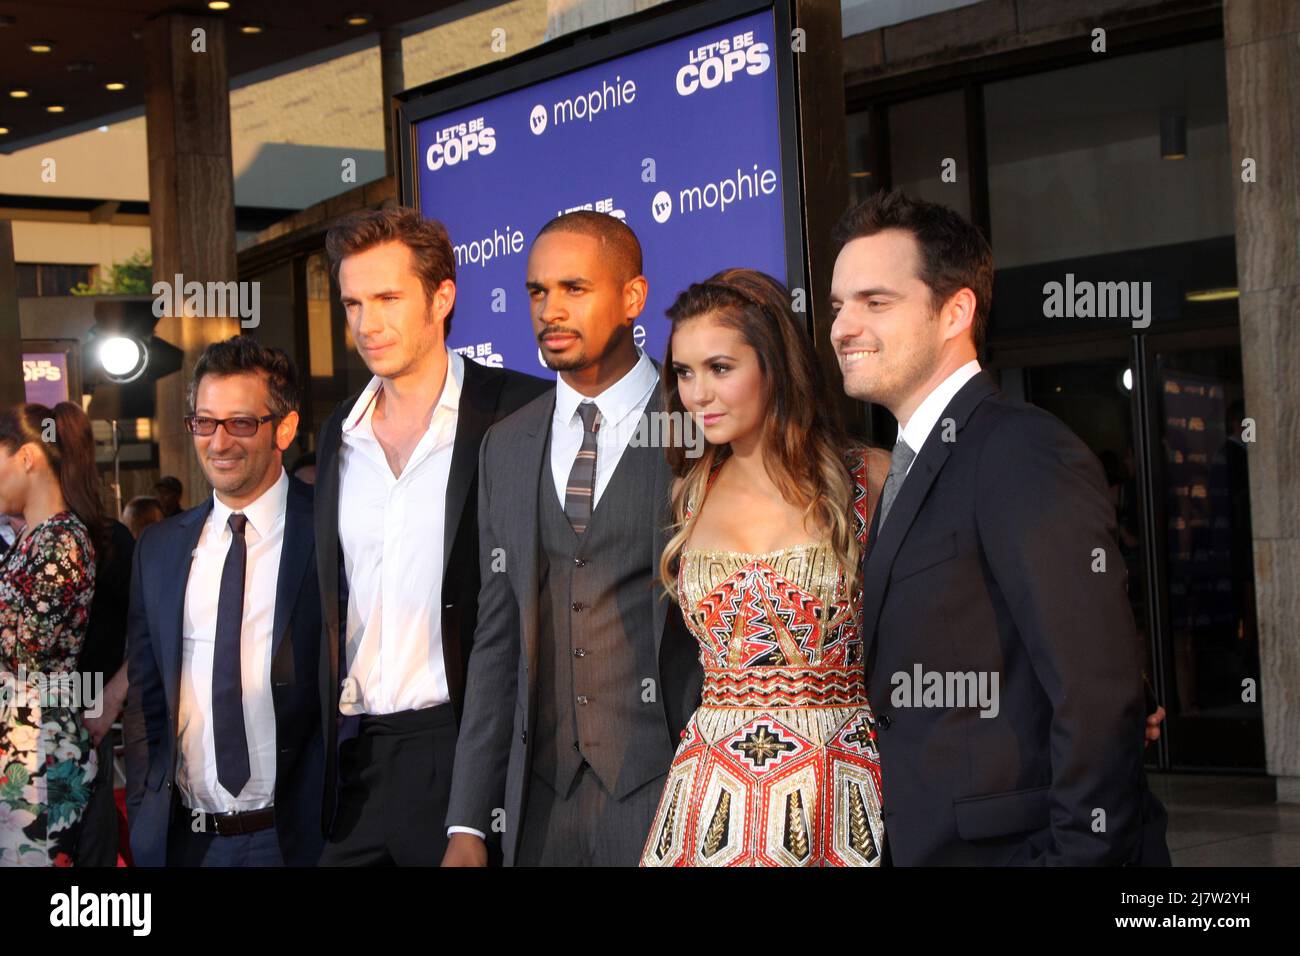 LOS ANGELES - AUG 7:  Luke Greenfield, James D'Arcy, Damon Wayans Jr, Nina Dobrev, Jake Johnson at the 'Let's Be Cops' Premiere at the ArcLight Hollywood Theaters on August 7, 2014 in Los Angeles, CA Stock Photo